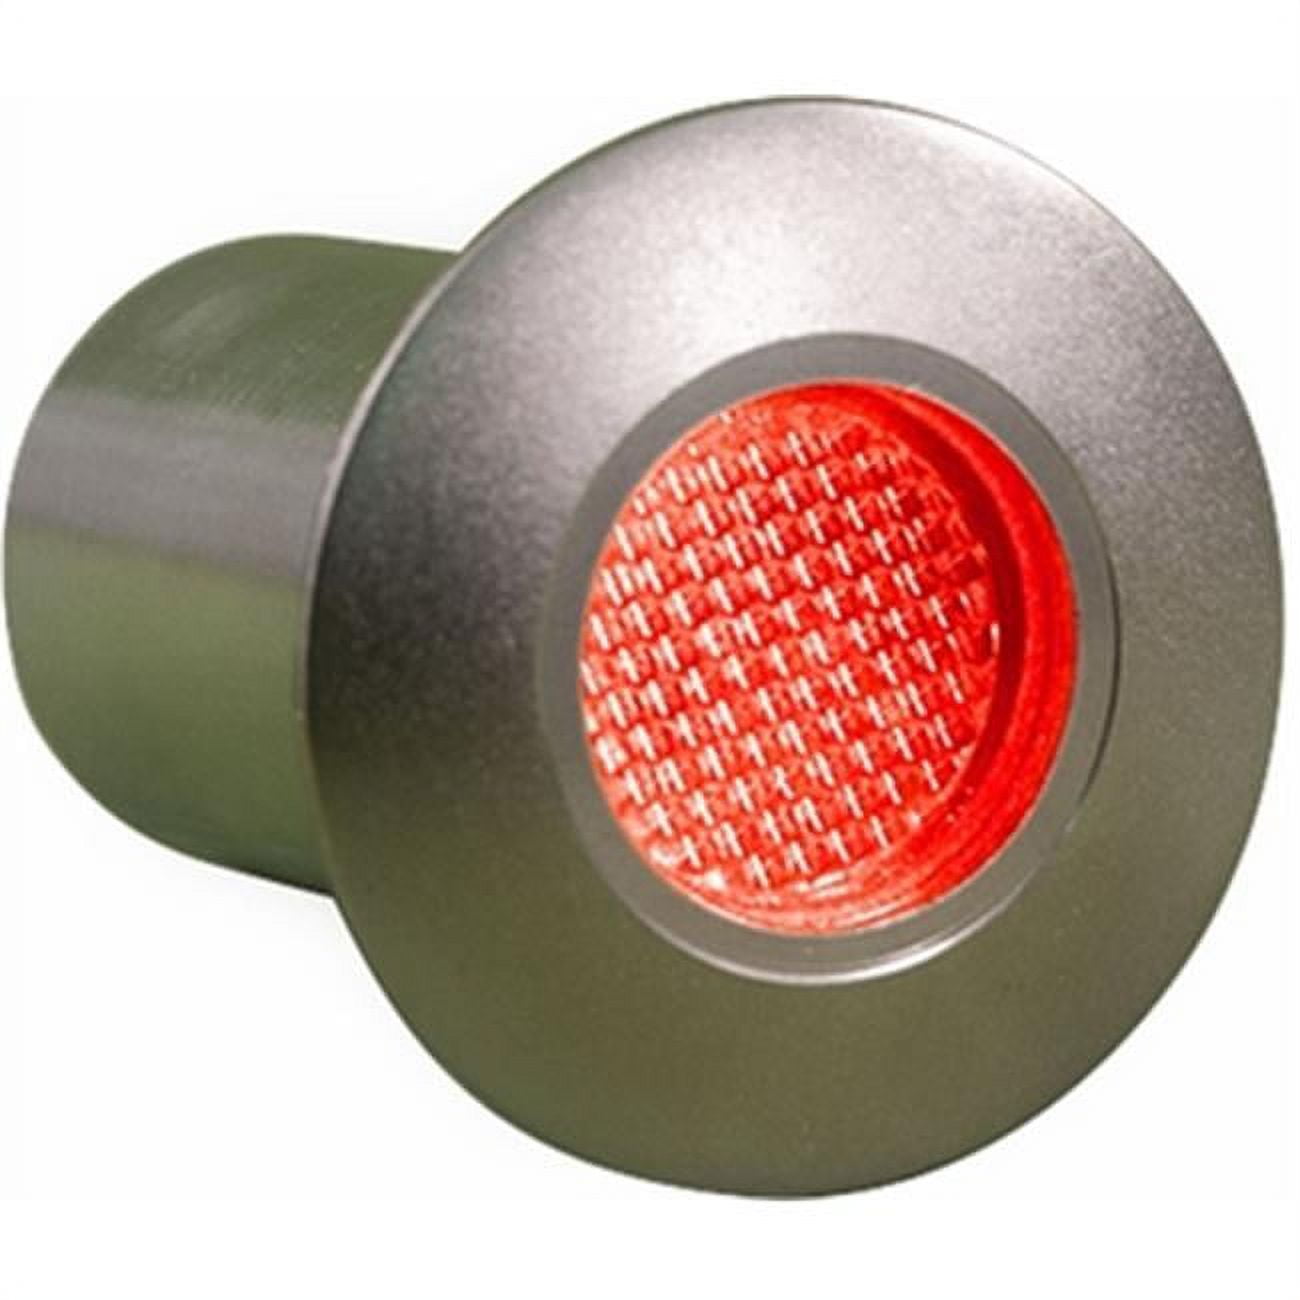 Picture of Dabmar Lighting LV309-R LED In-Ground Red Well Light, Zinc Alloy - 2.95 x 3.43 x 3.43 in.